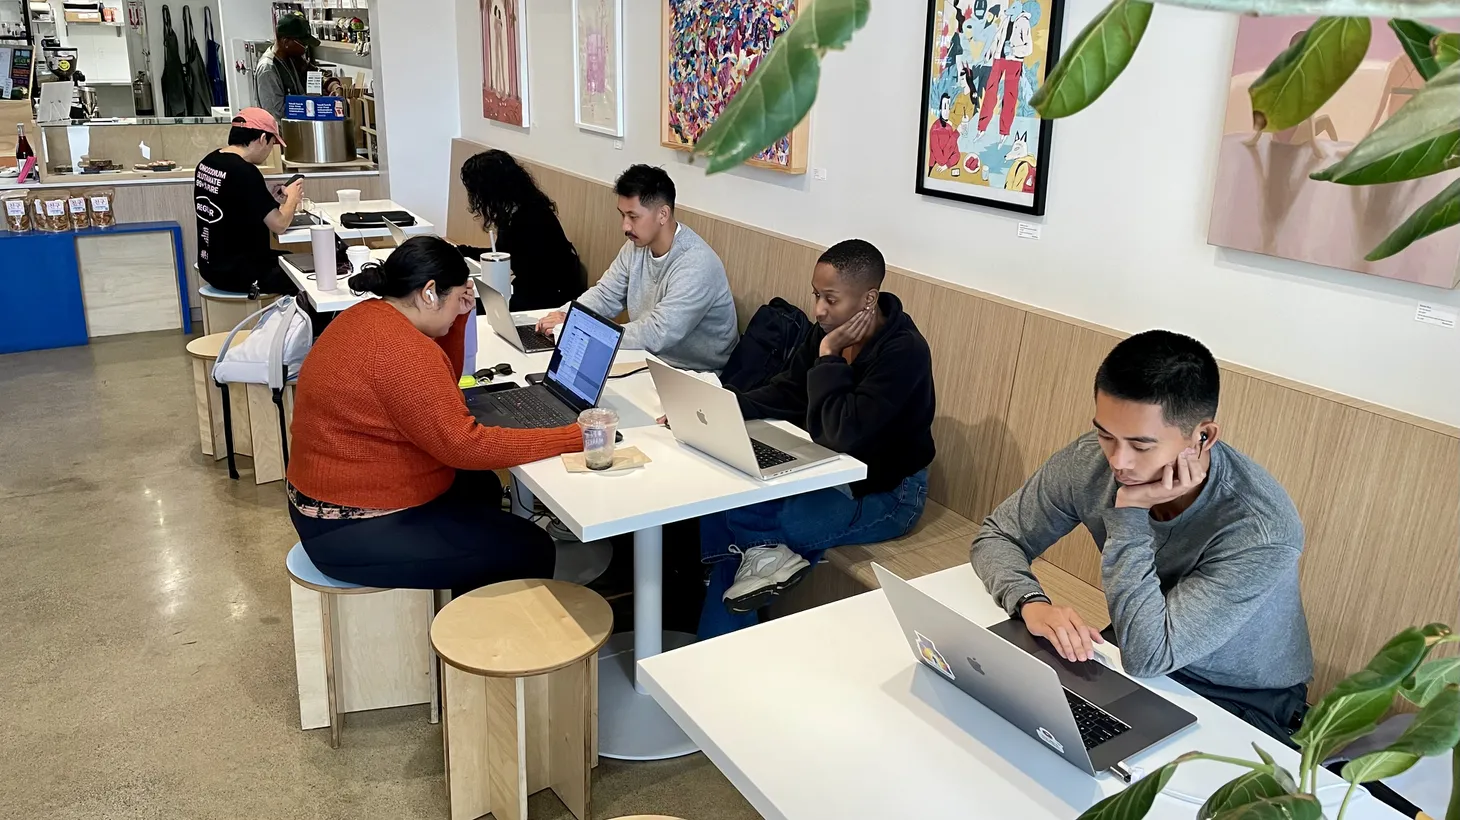 Remote workers use Open Market in Koreatown as a shared office space during an event hosted by LA in Common. Groups like these are working out deals with restaurants and coffee shops to host coworking pop-ups.